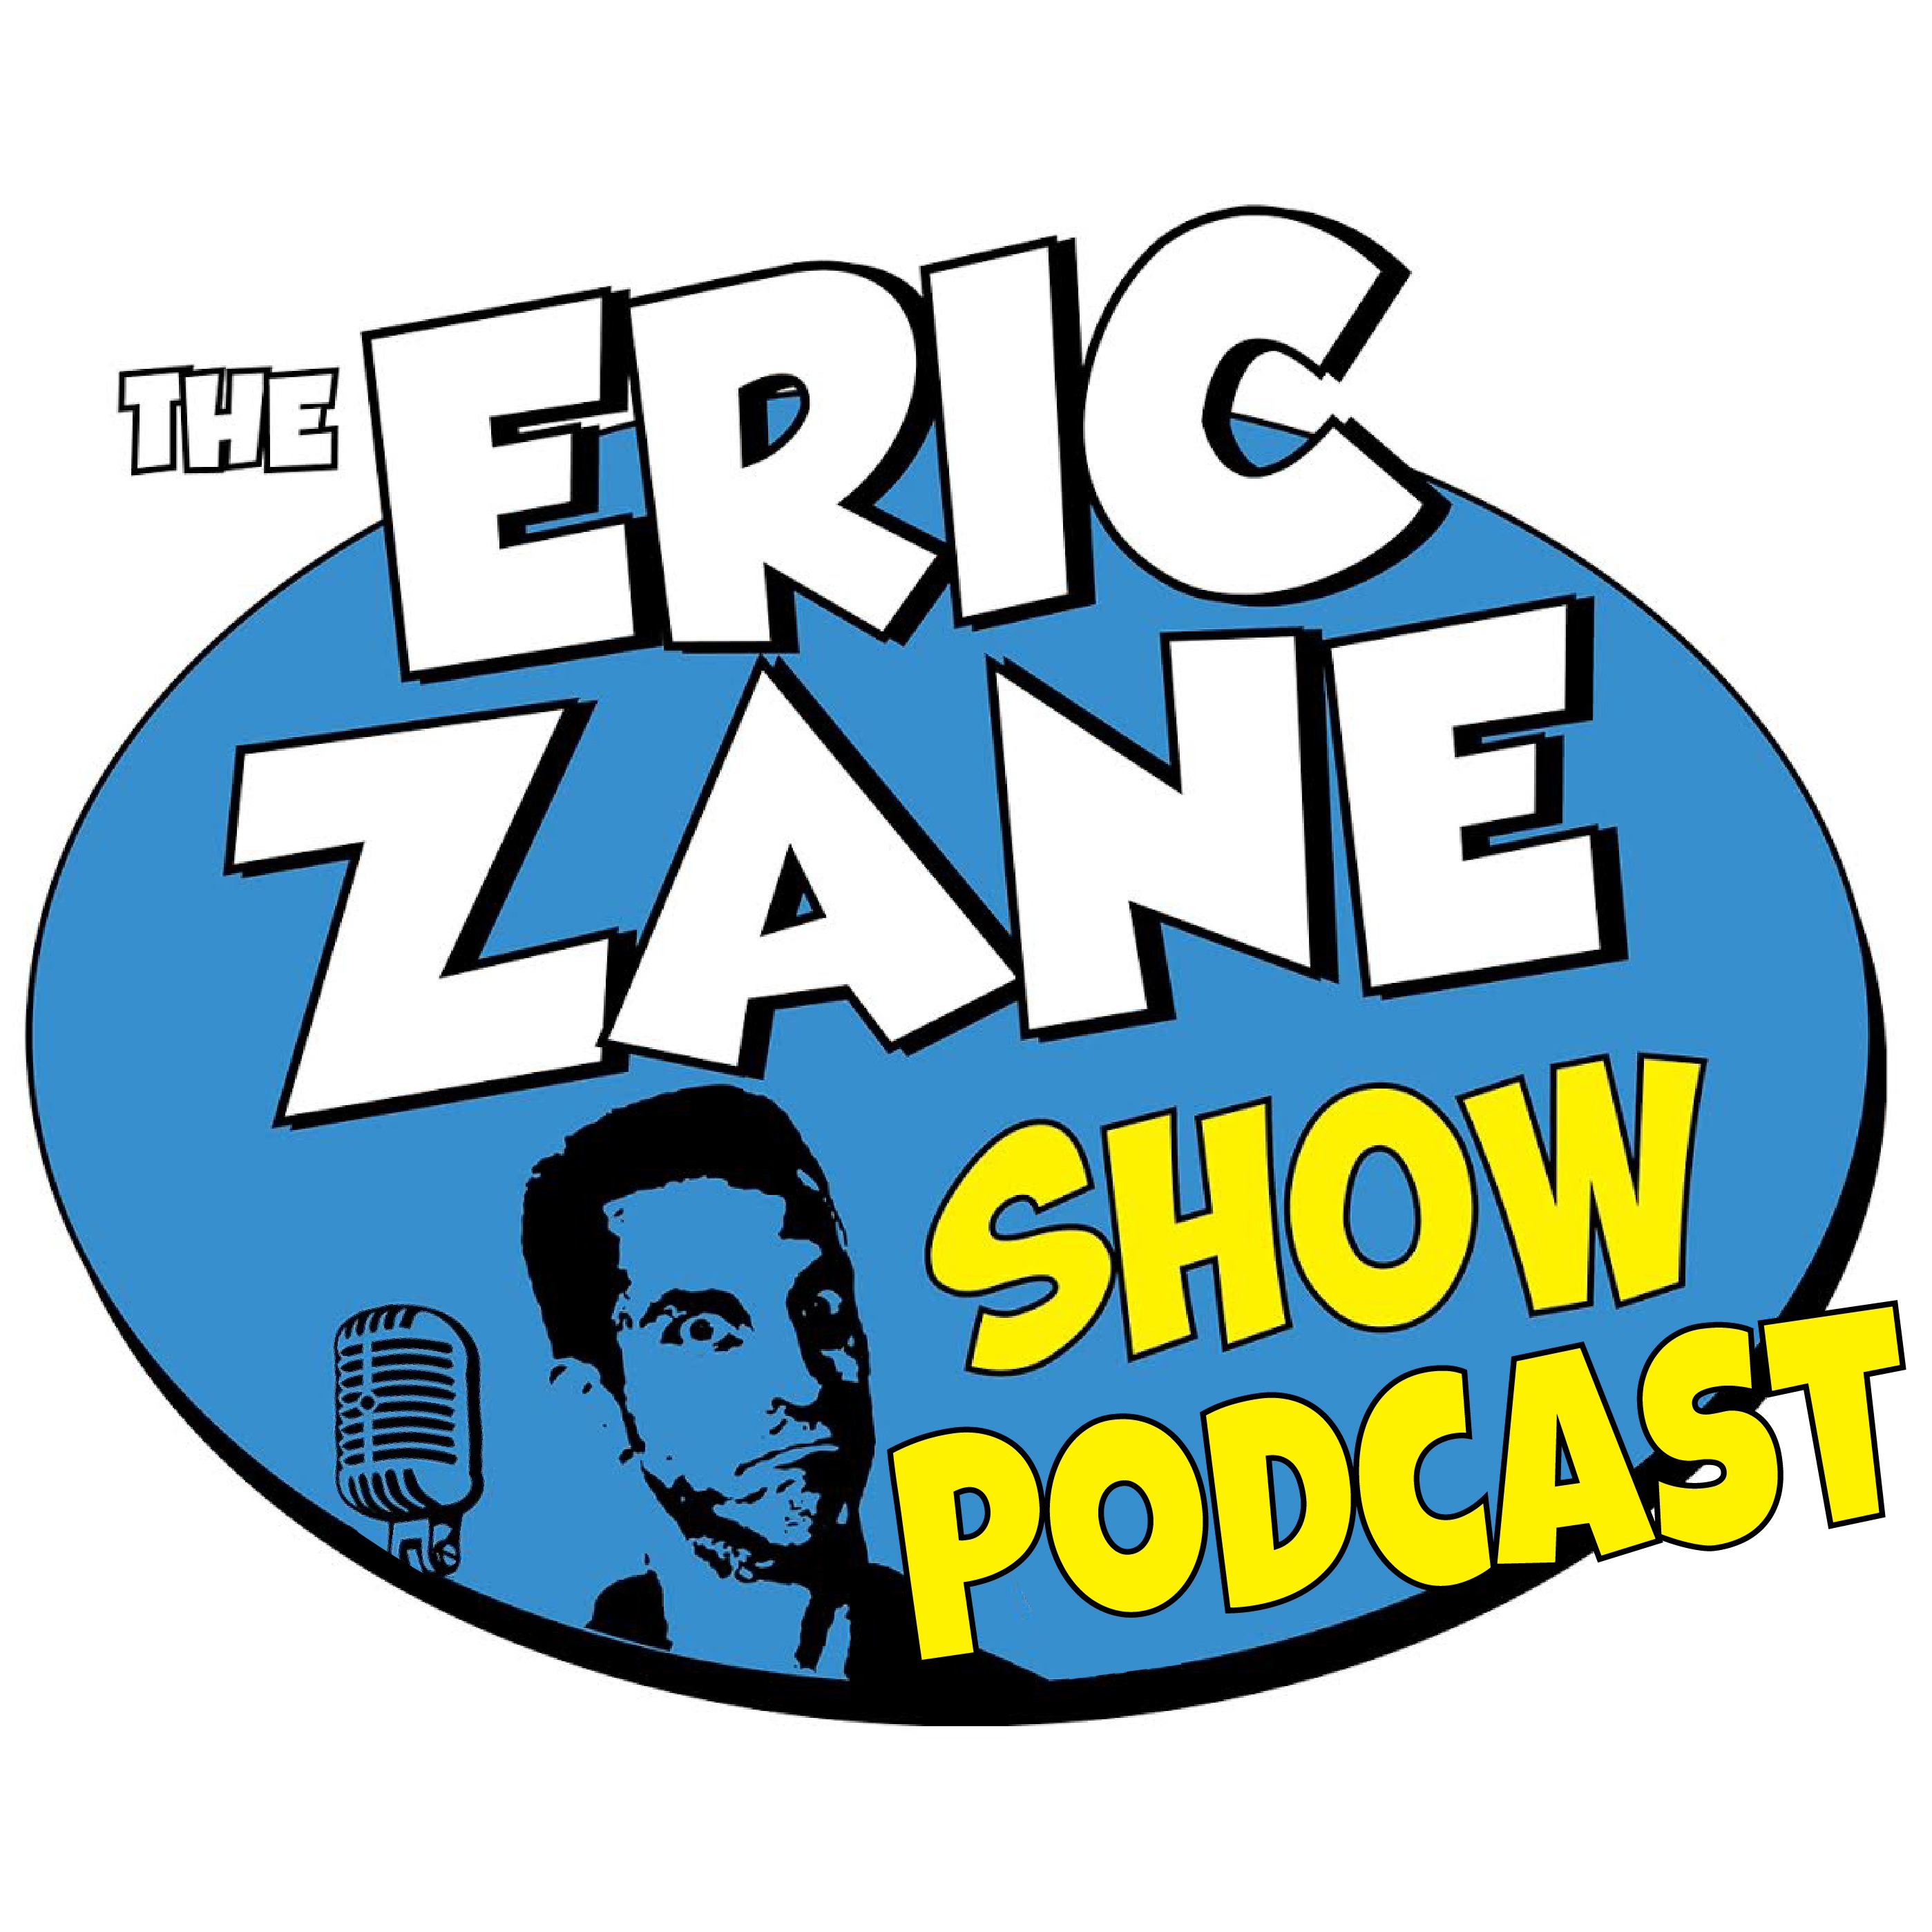 Eric Zane Show Podcast 954 - Alabama got robbed and my Lions superstition